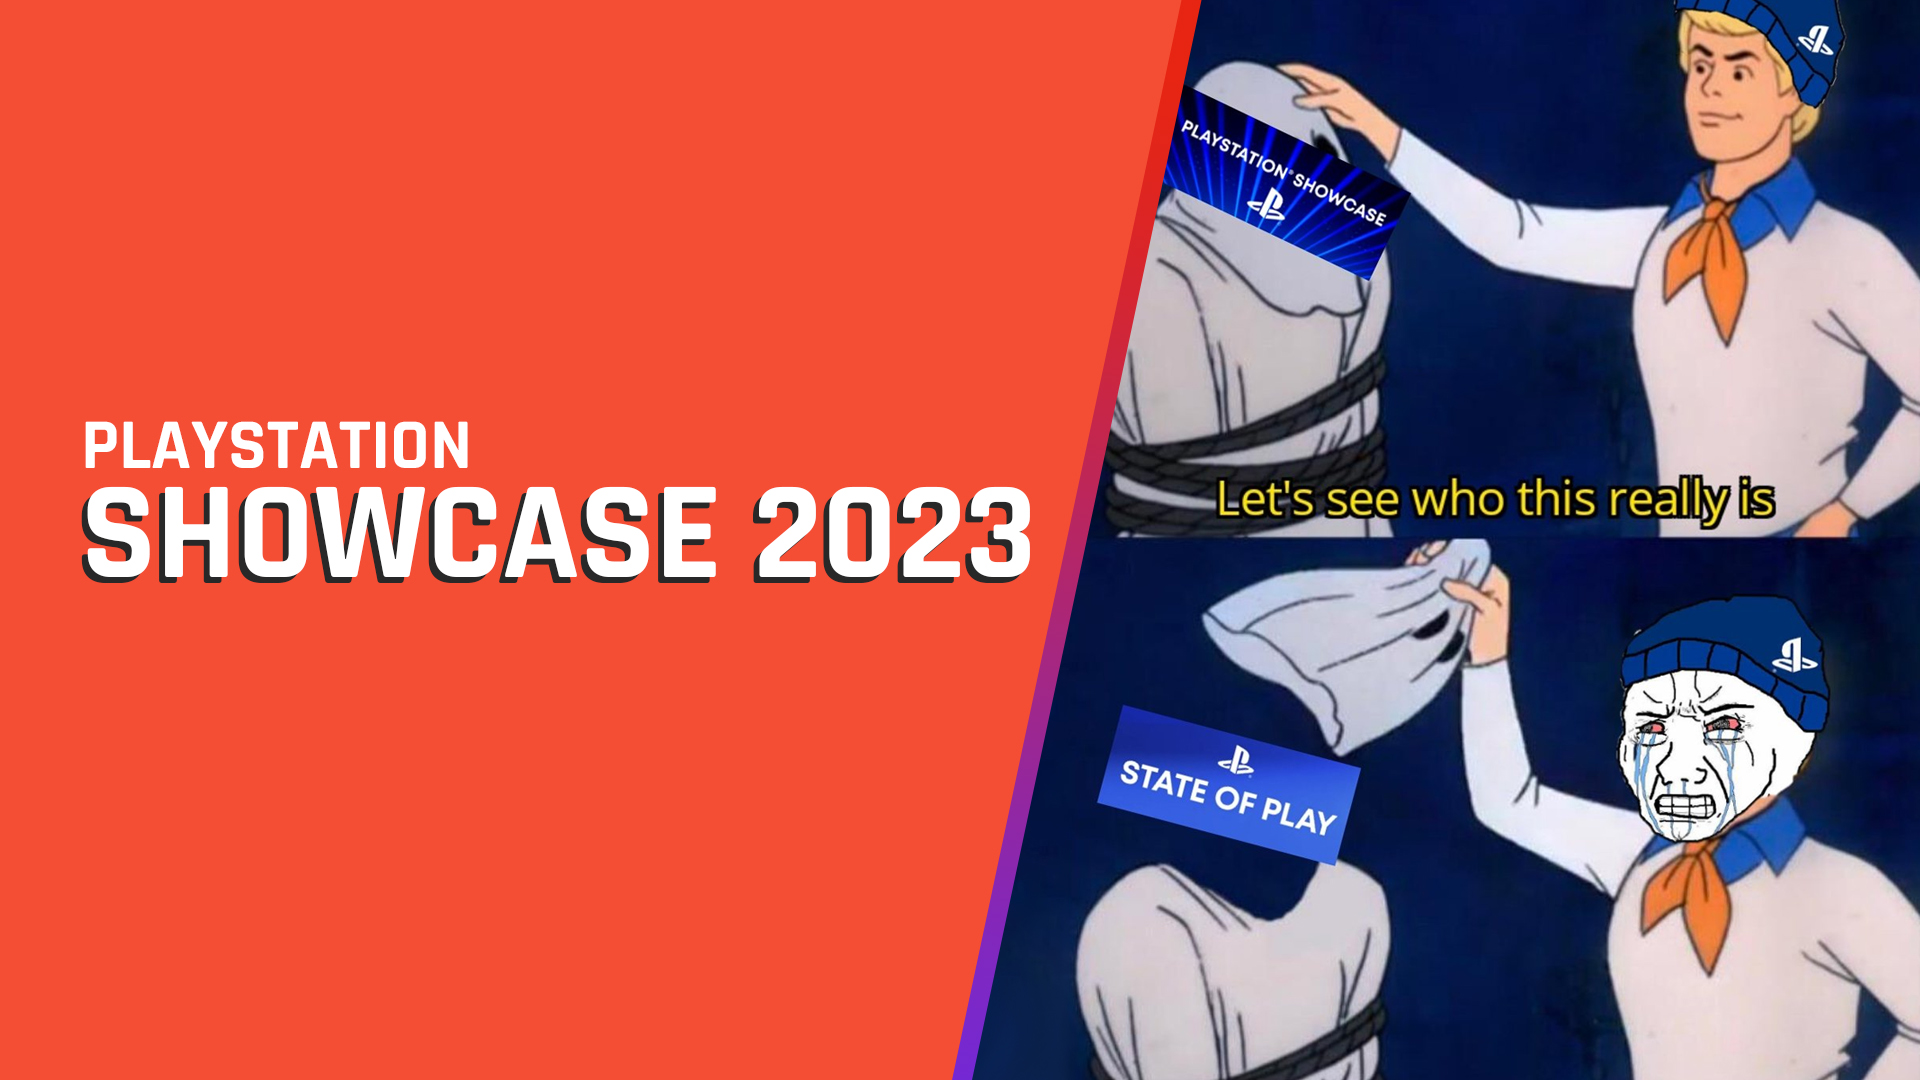 THE 2023 PLAYSTATION SHOWCASE IS COMING! WHAT WILL WE SEE